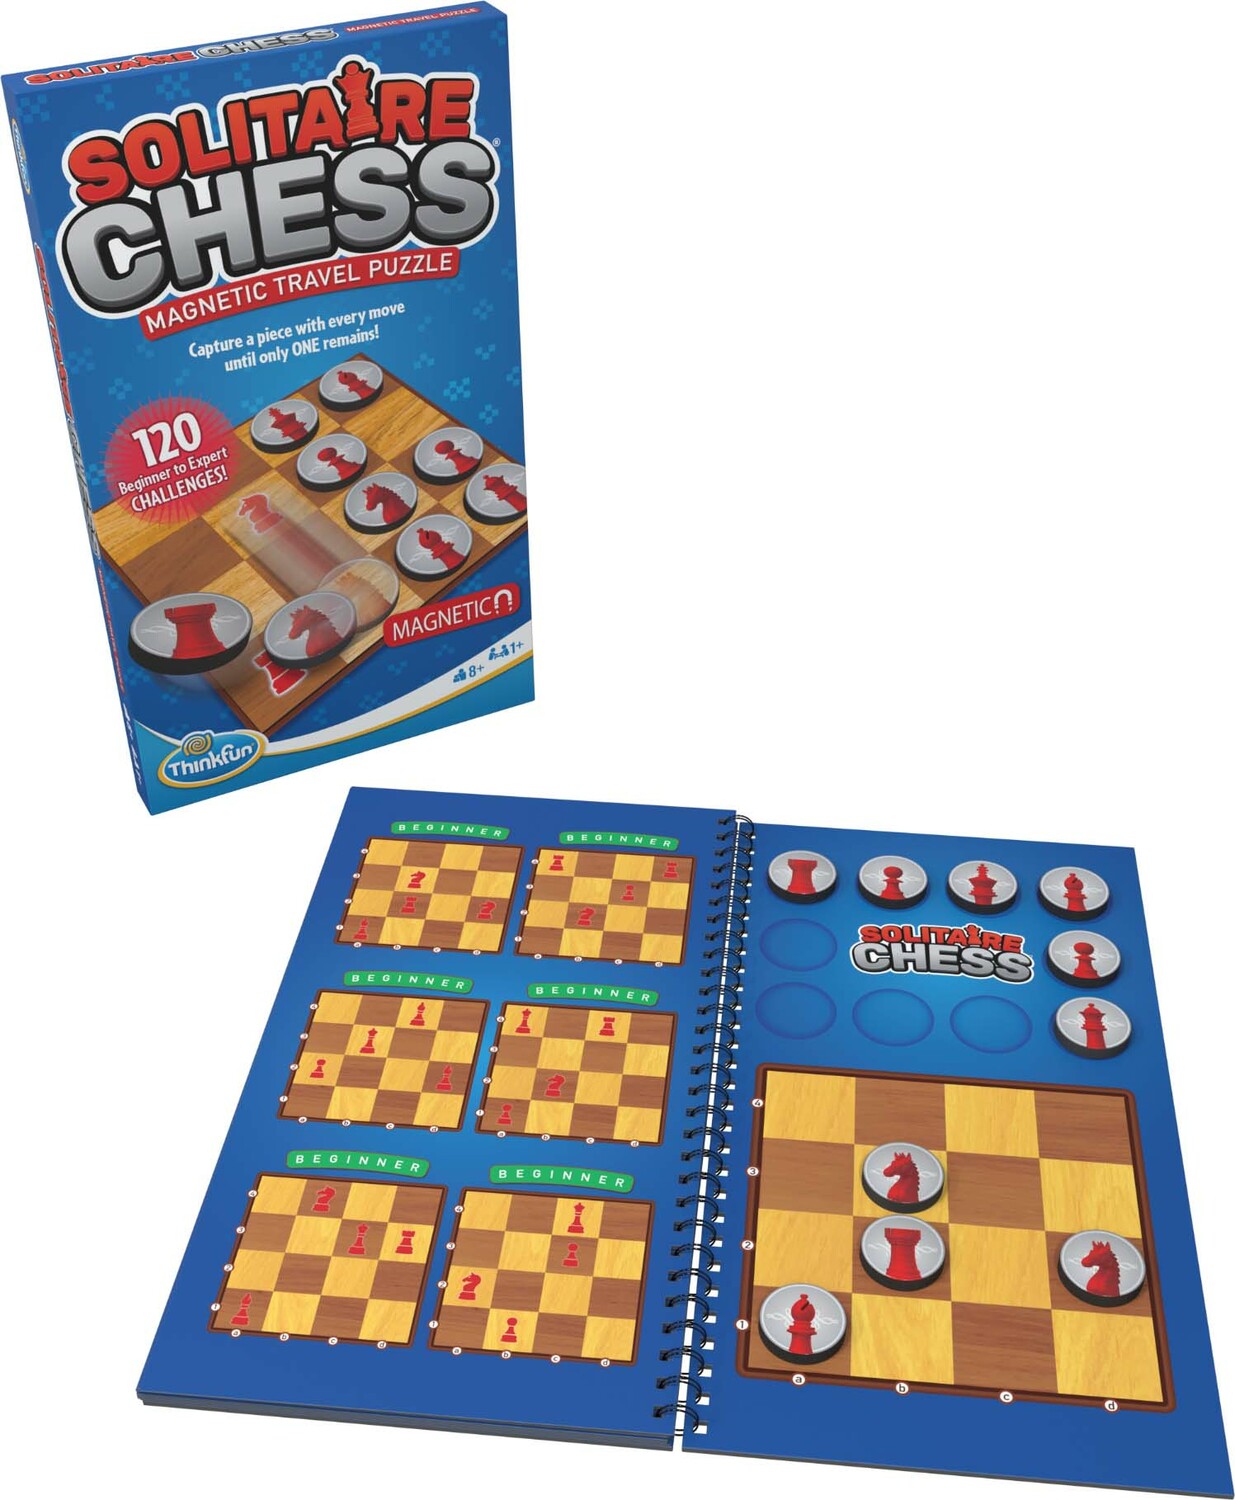 Solitare Chess Magnetic Travel